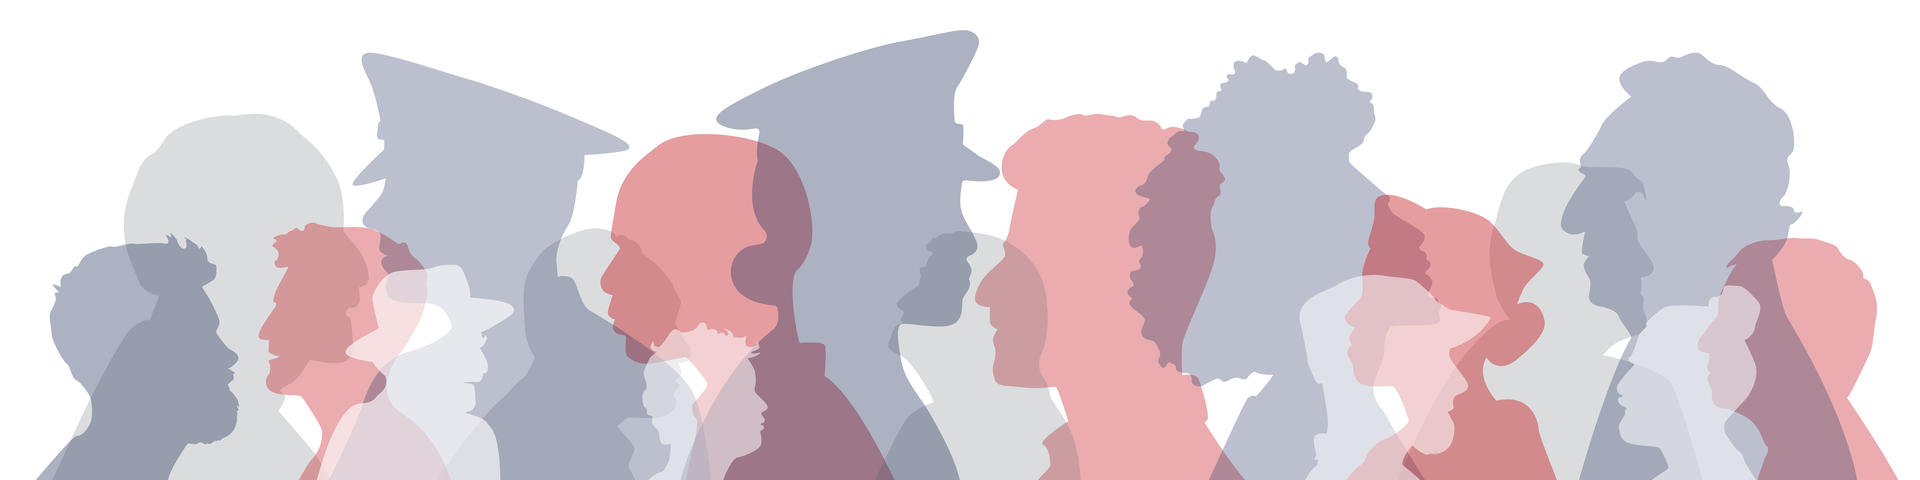 Red, white and blue silhouettes of diverse military personnel